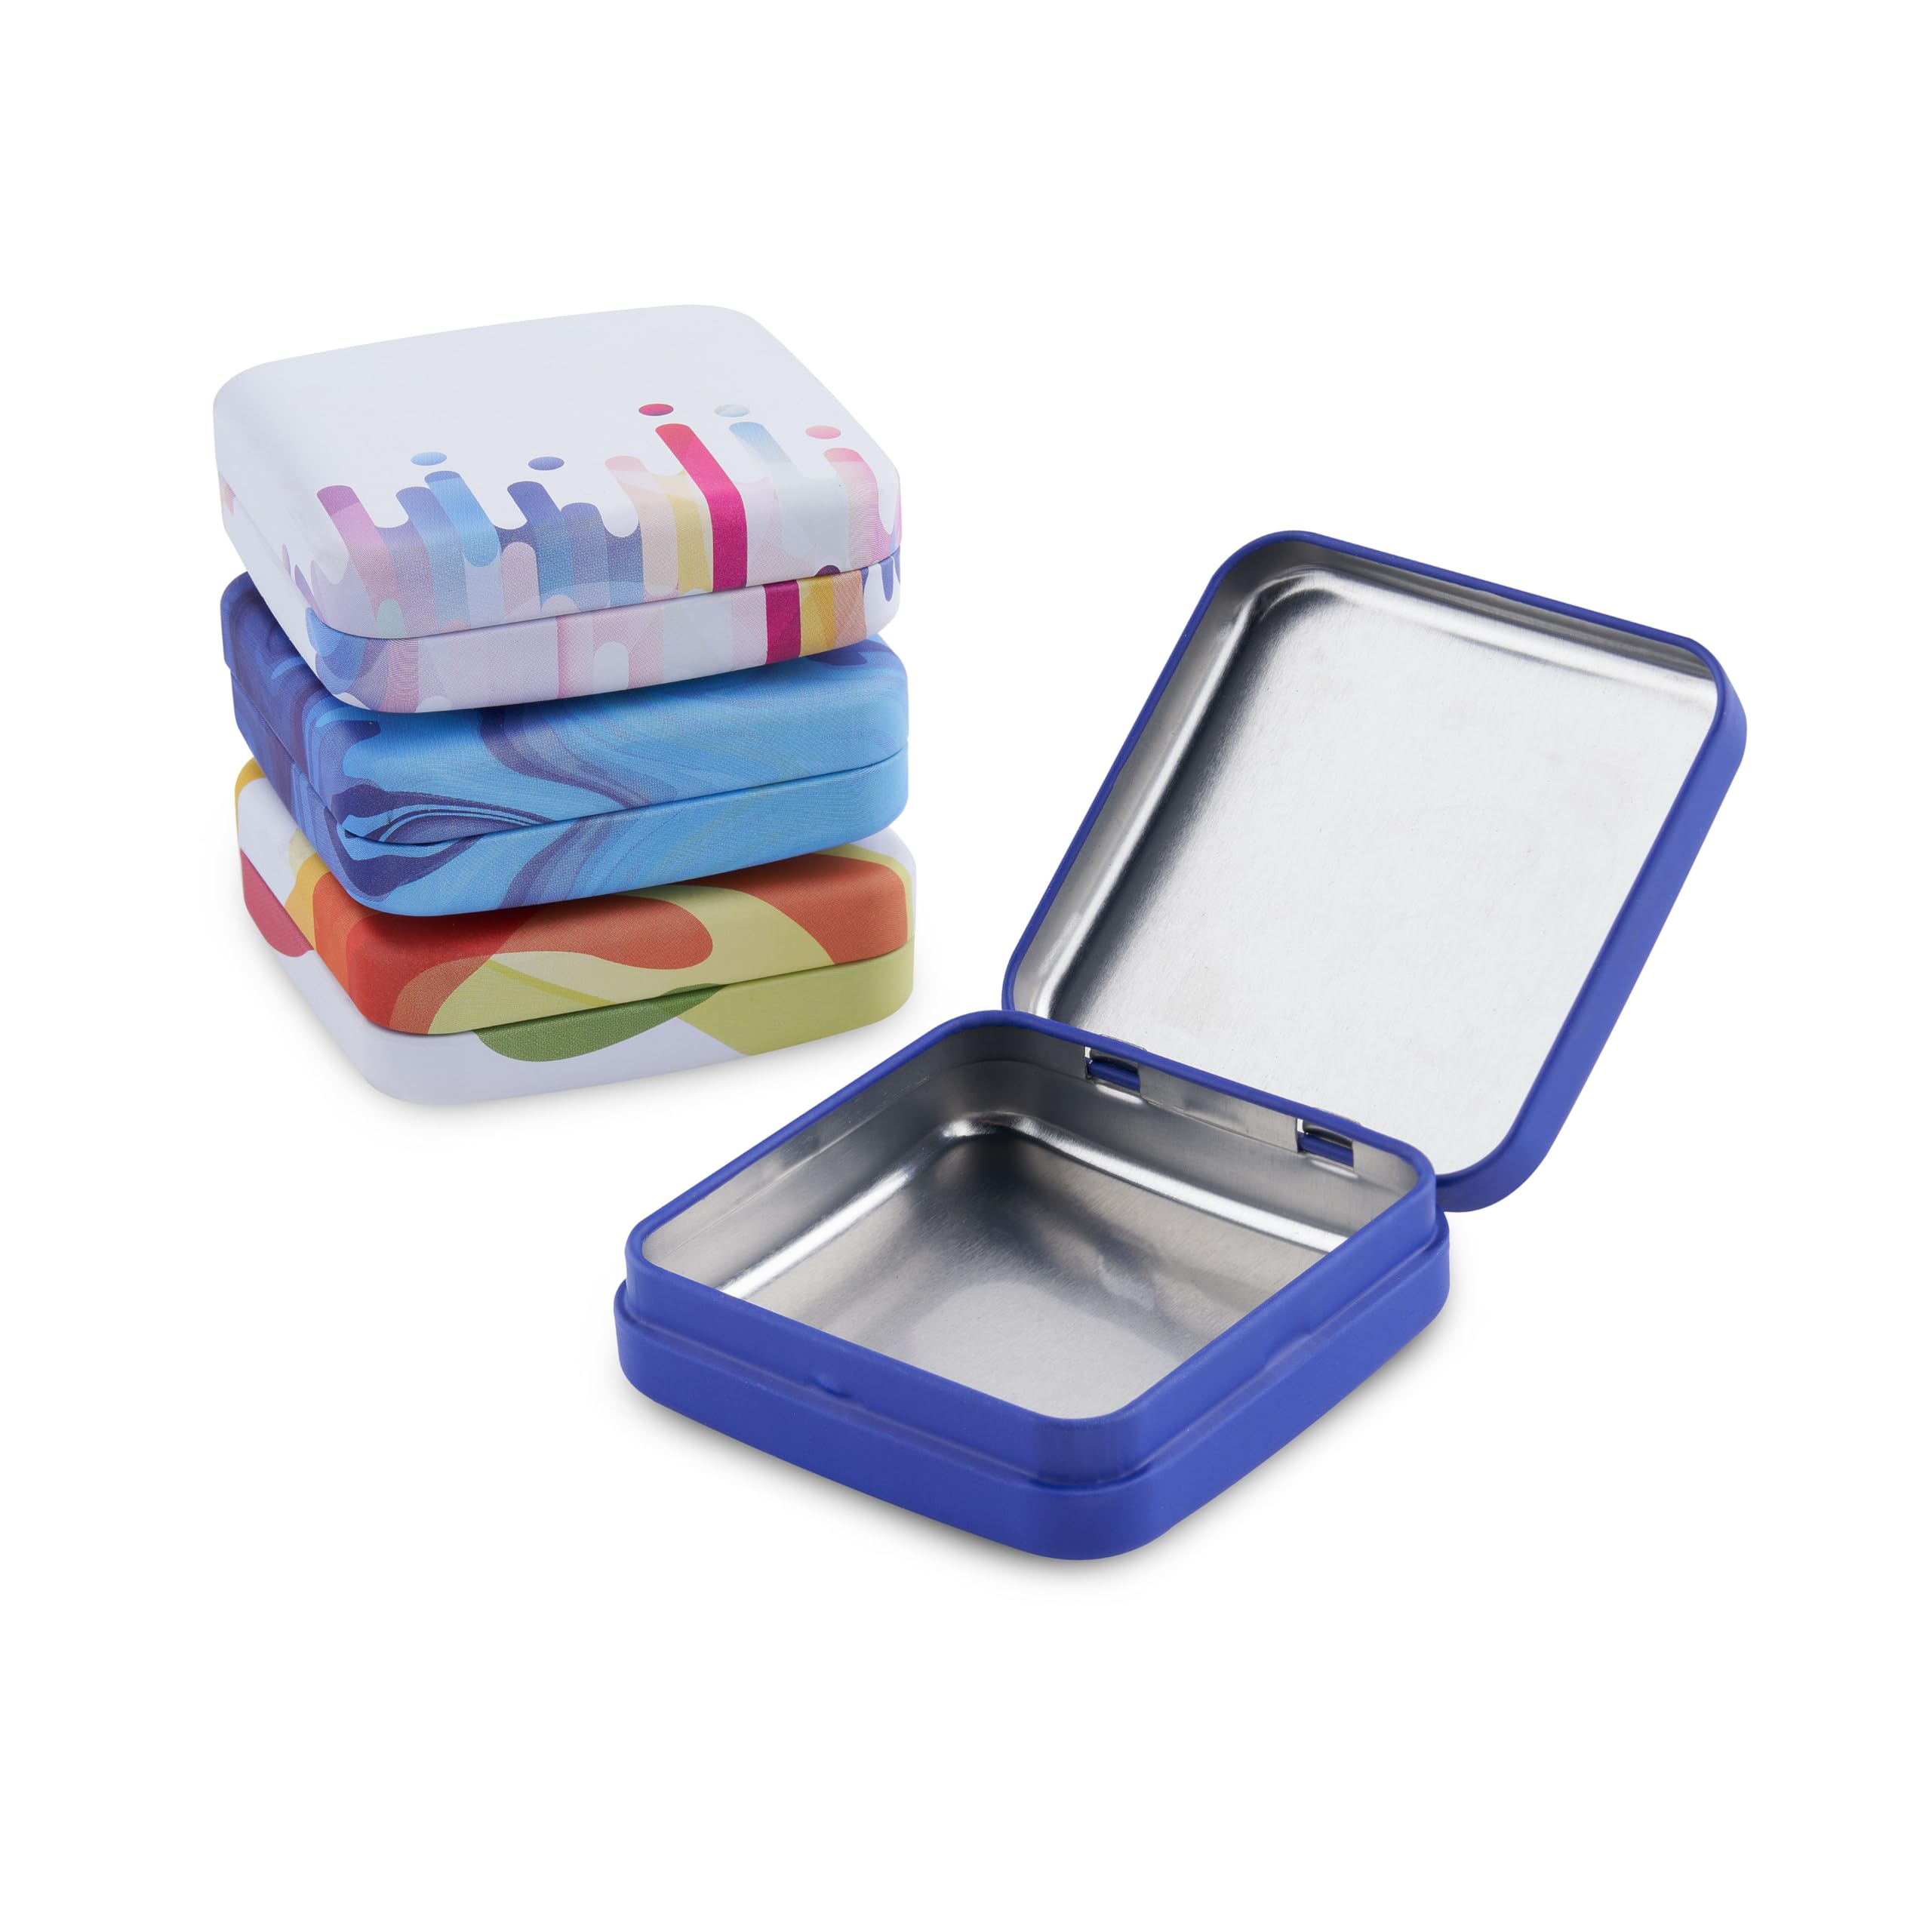 Zeiss Lens Cleaning Accessory Tin Box Containers with Hinge Lids, Pack of 4